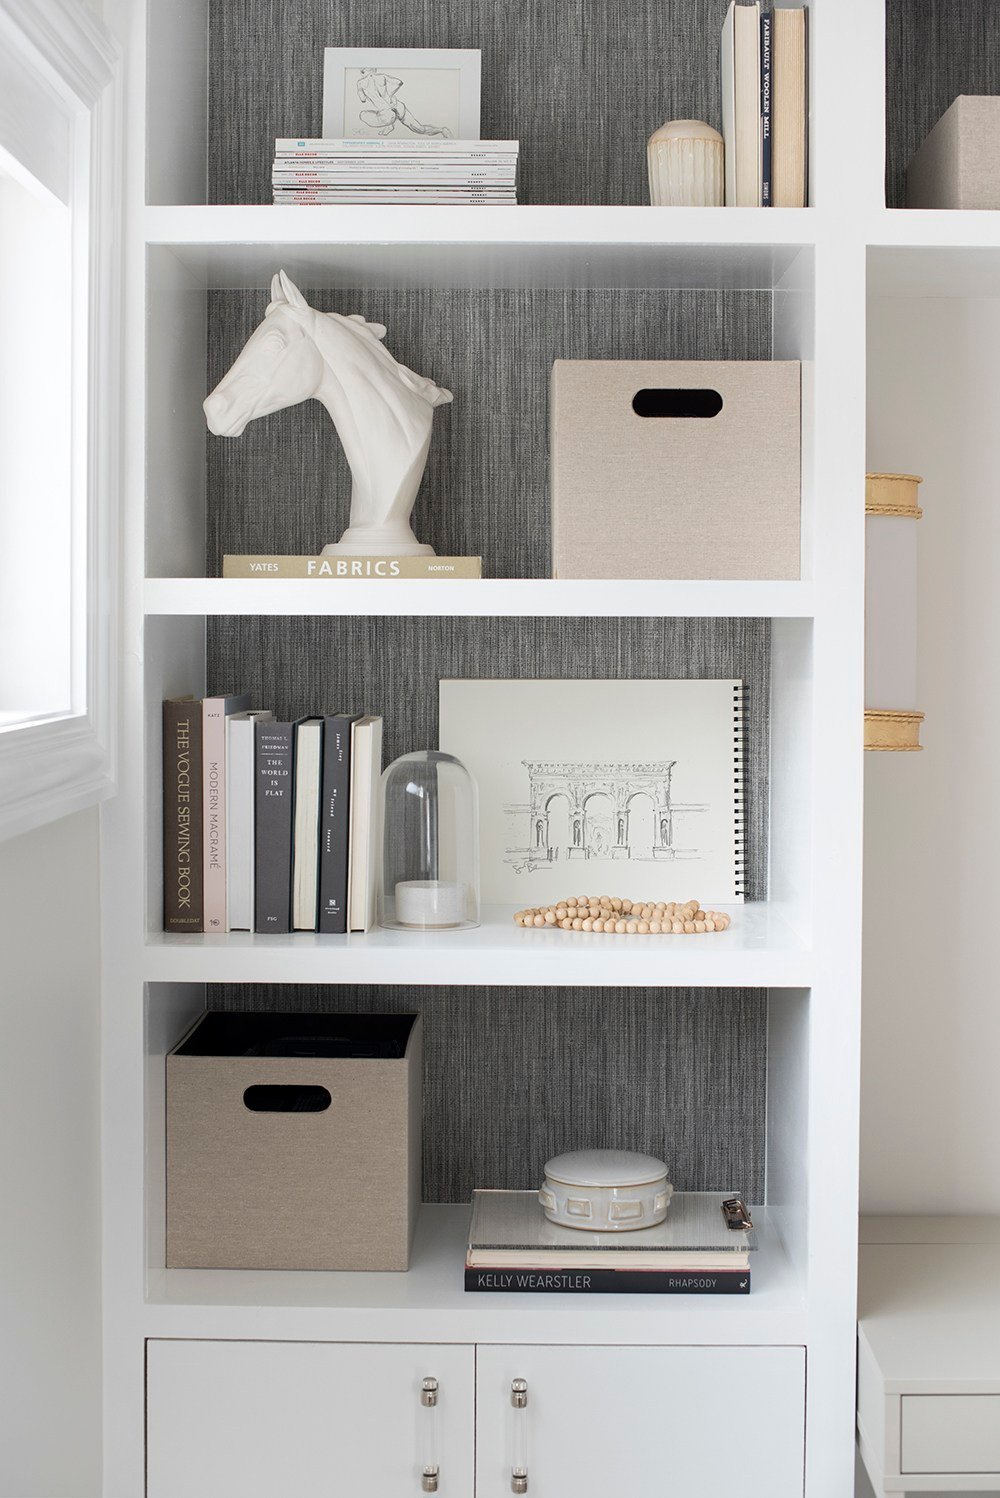 5 Inspiring Shelf Styling & Built-In Posts - roomfortuesday.com